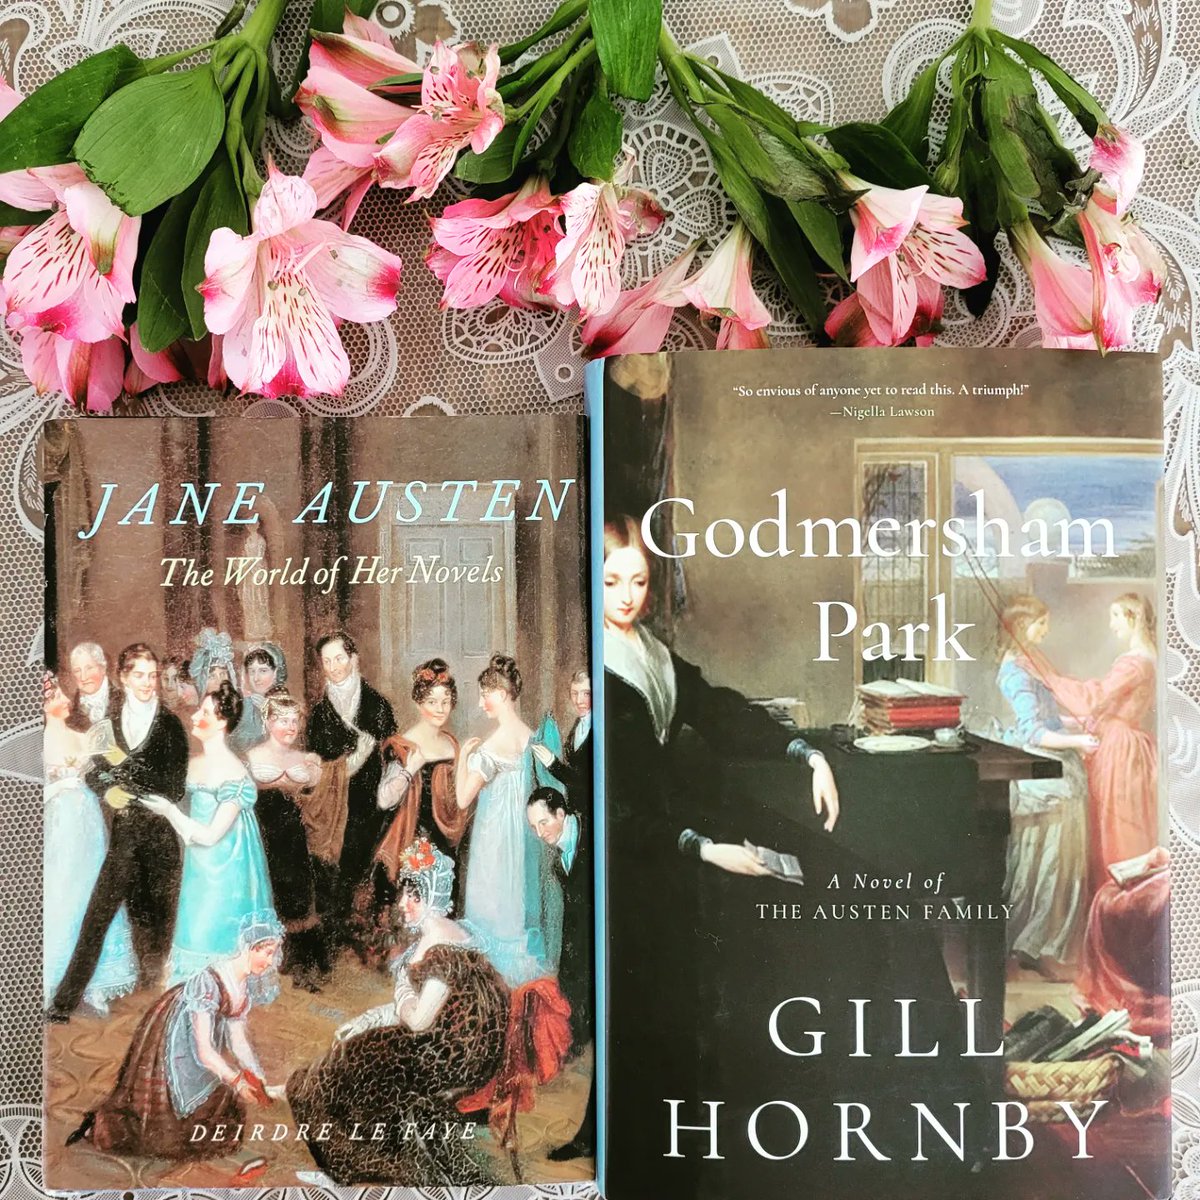 Literary Tourism - what literary sites would you like to visit?  I would love to go to England and visit all of the Jane Austen sites.   #janeausten #literarytourism #janeawesomewednesday #godmershampark @GillHornby #deidrelefaye #janeaustentheworldofhernovels